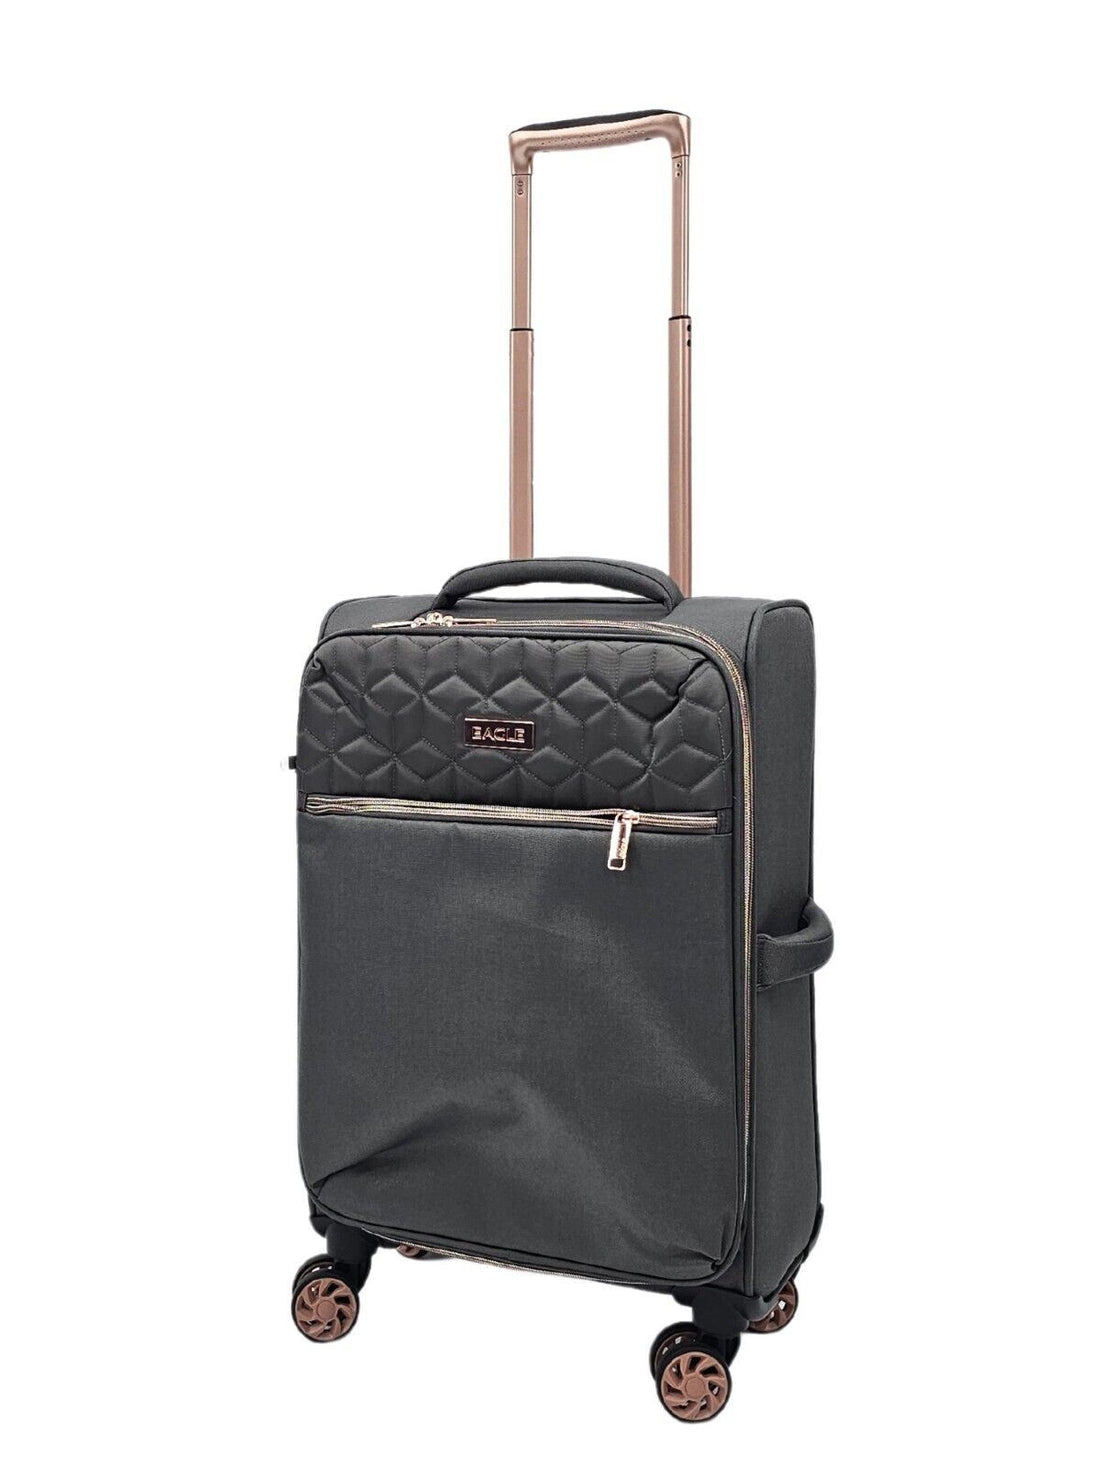 Cabin Grey Suitcases Set 4 Wheel Luggage Travel Lightweight Bags - Upperclass Fashions 